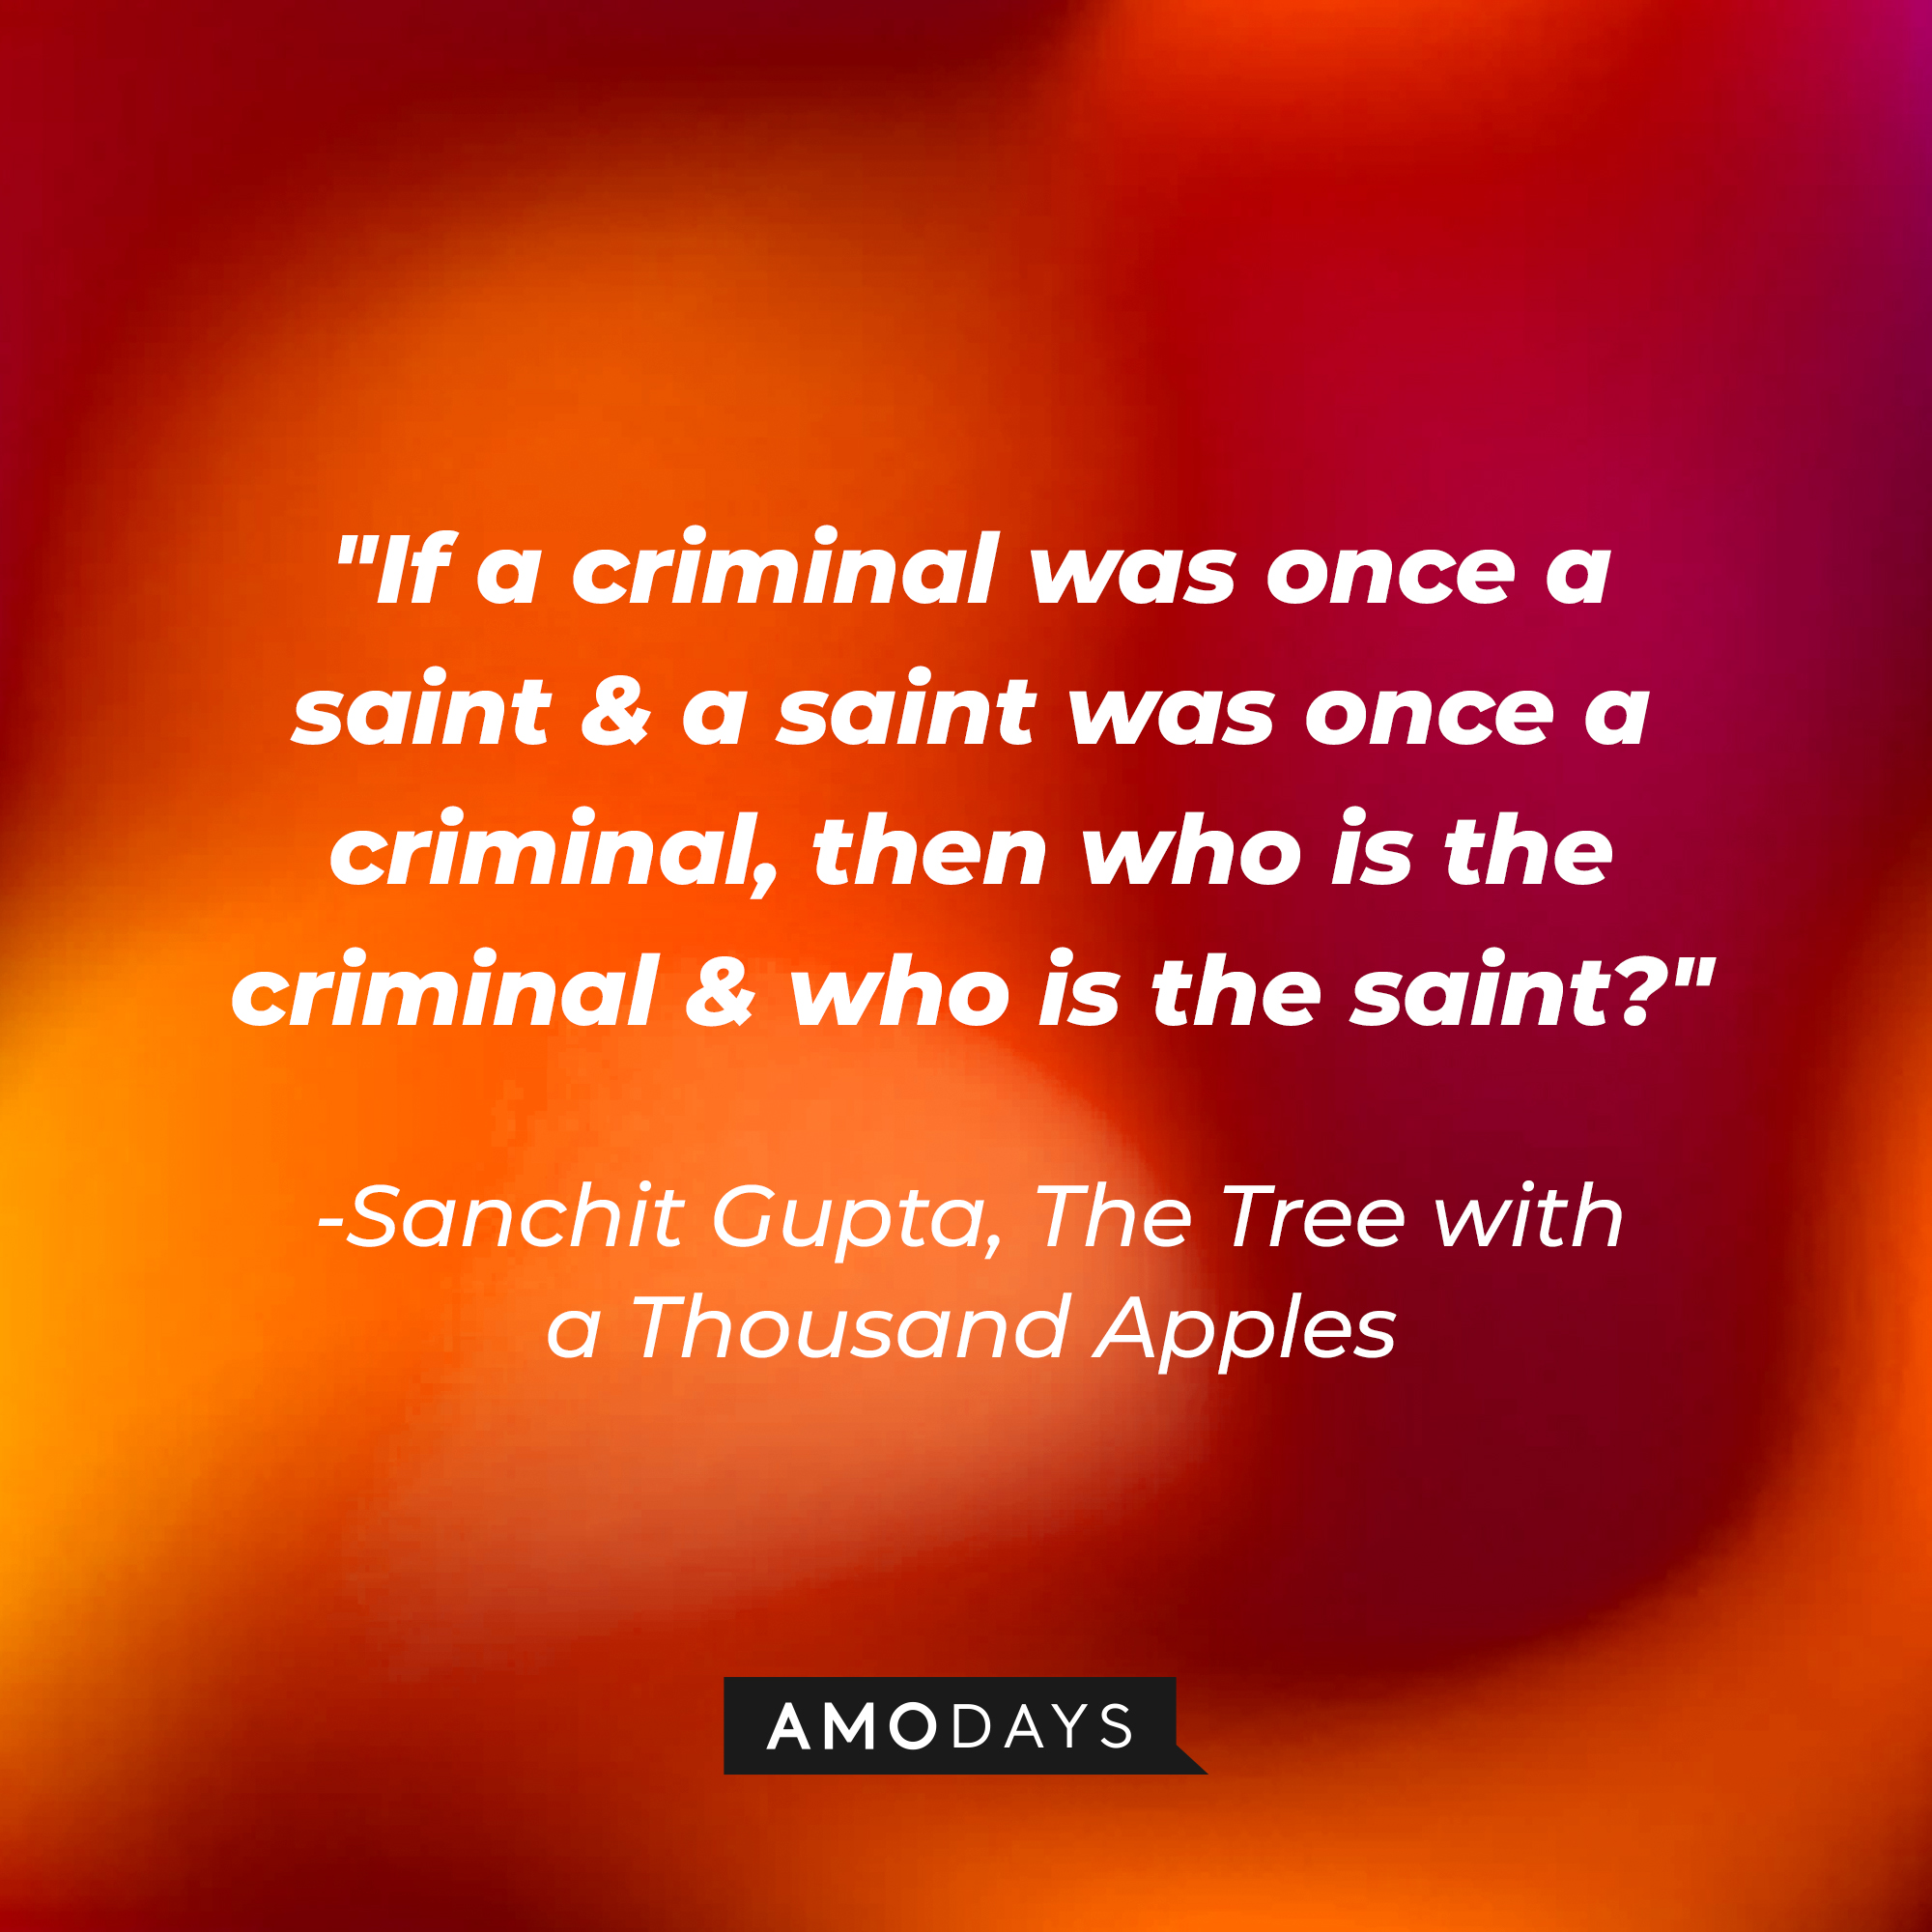 A photo with Sanchit Gupta's quote, "If a criminal was once a saint & a saint was once a criminal, then who is the criminal & who is the saint?" | Source: Amodays